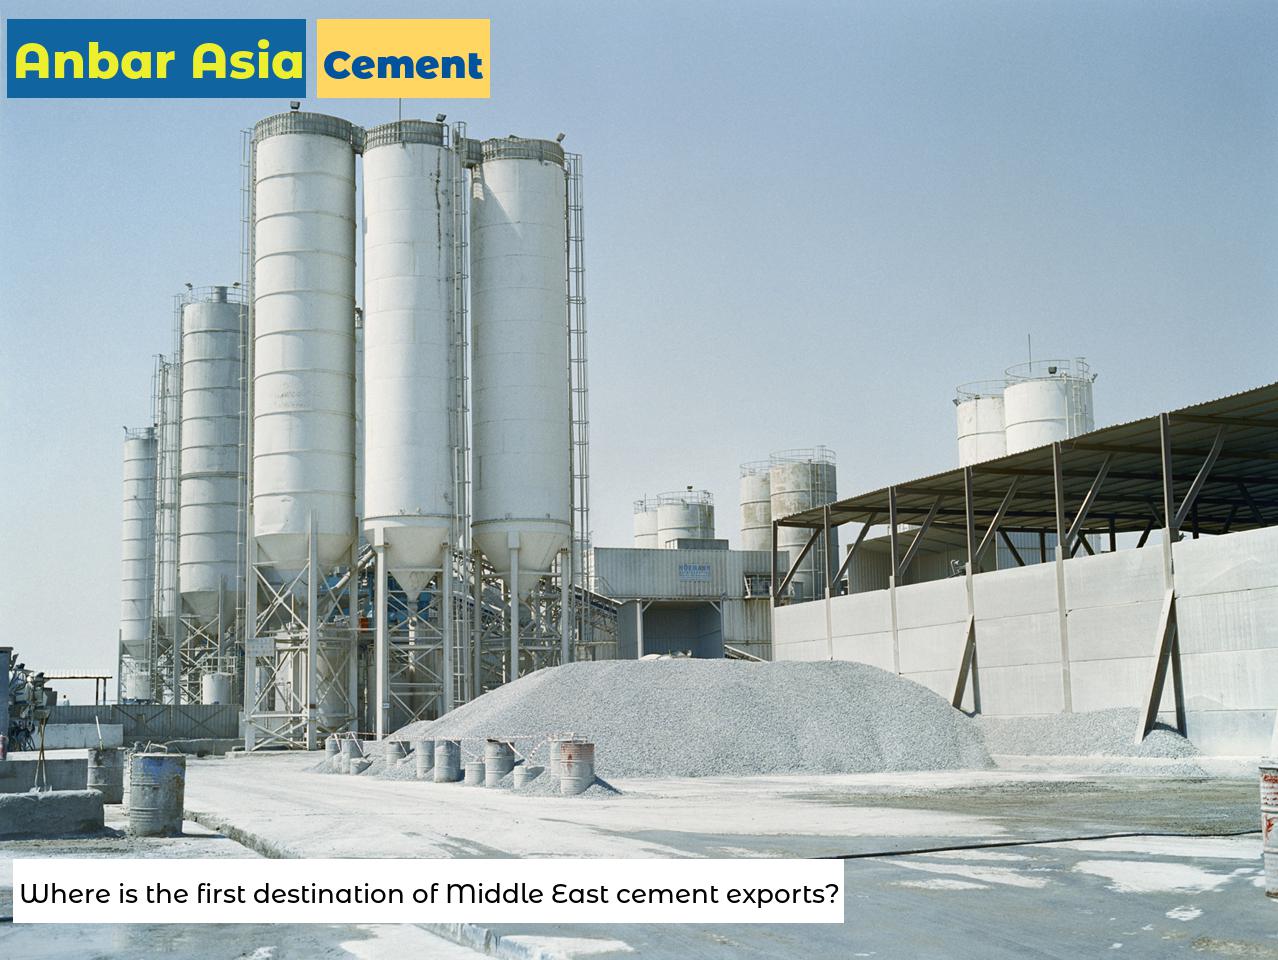 Where is the first destination of Middle East cement exports?